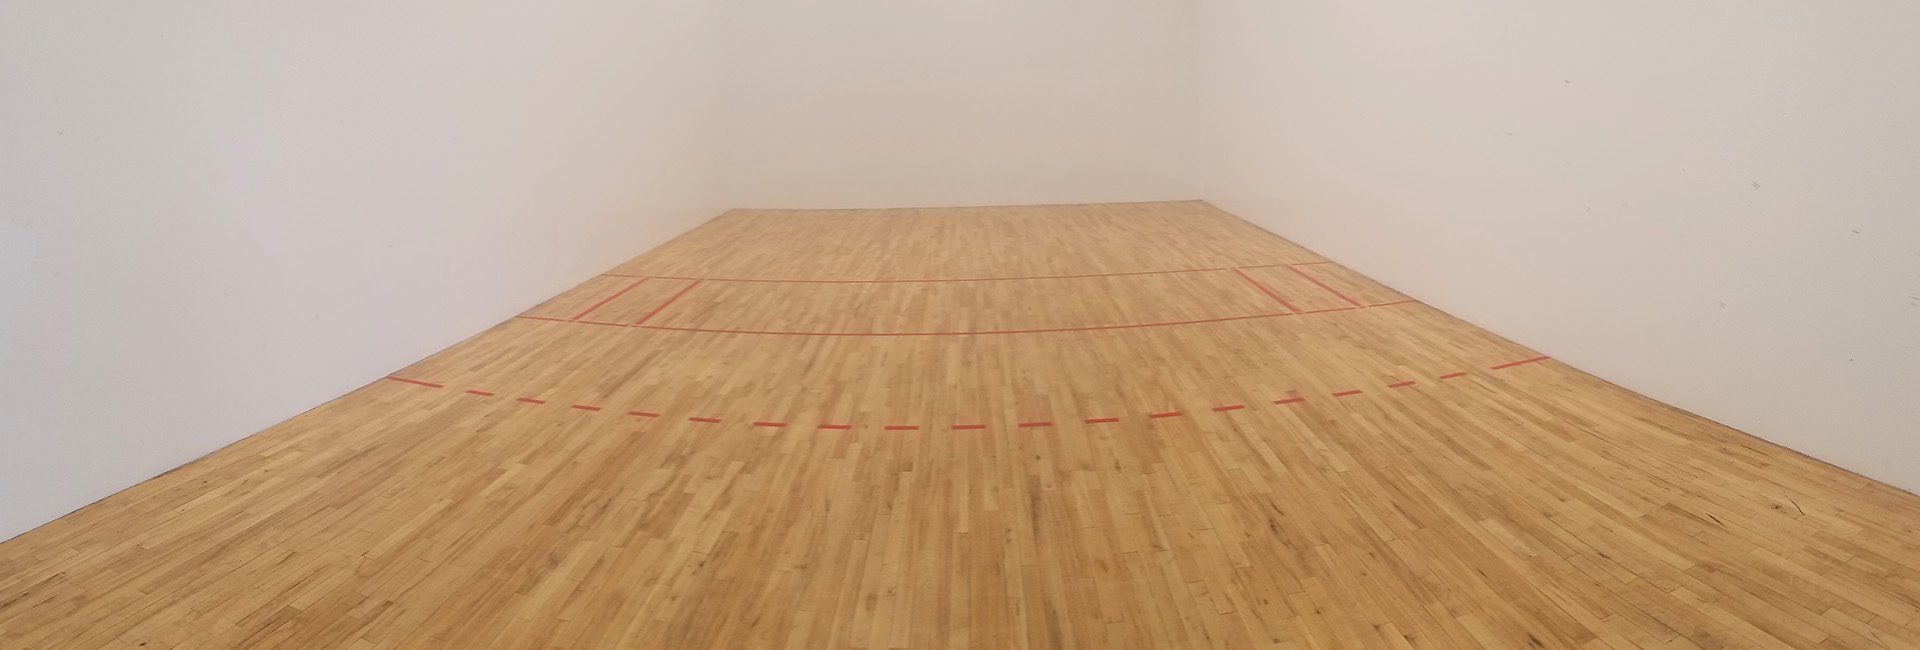 racquetball courts in a gym available with membership